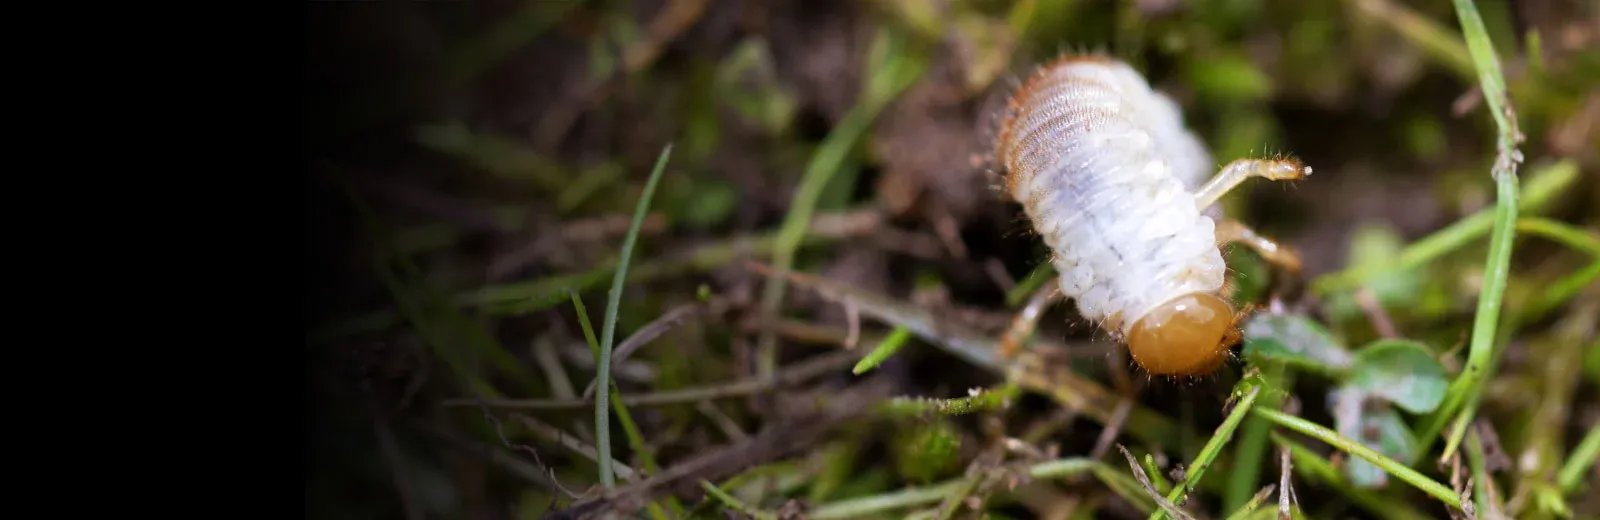 Close up view of grub in grass